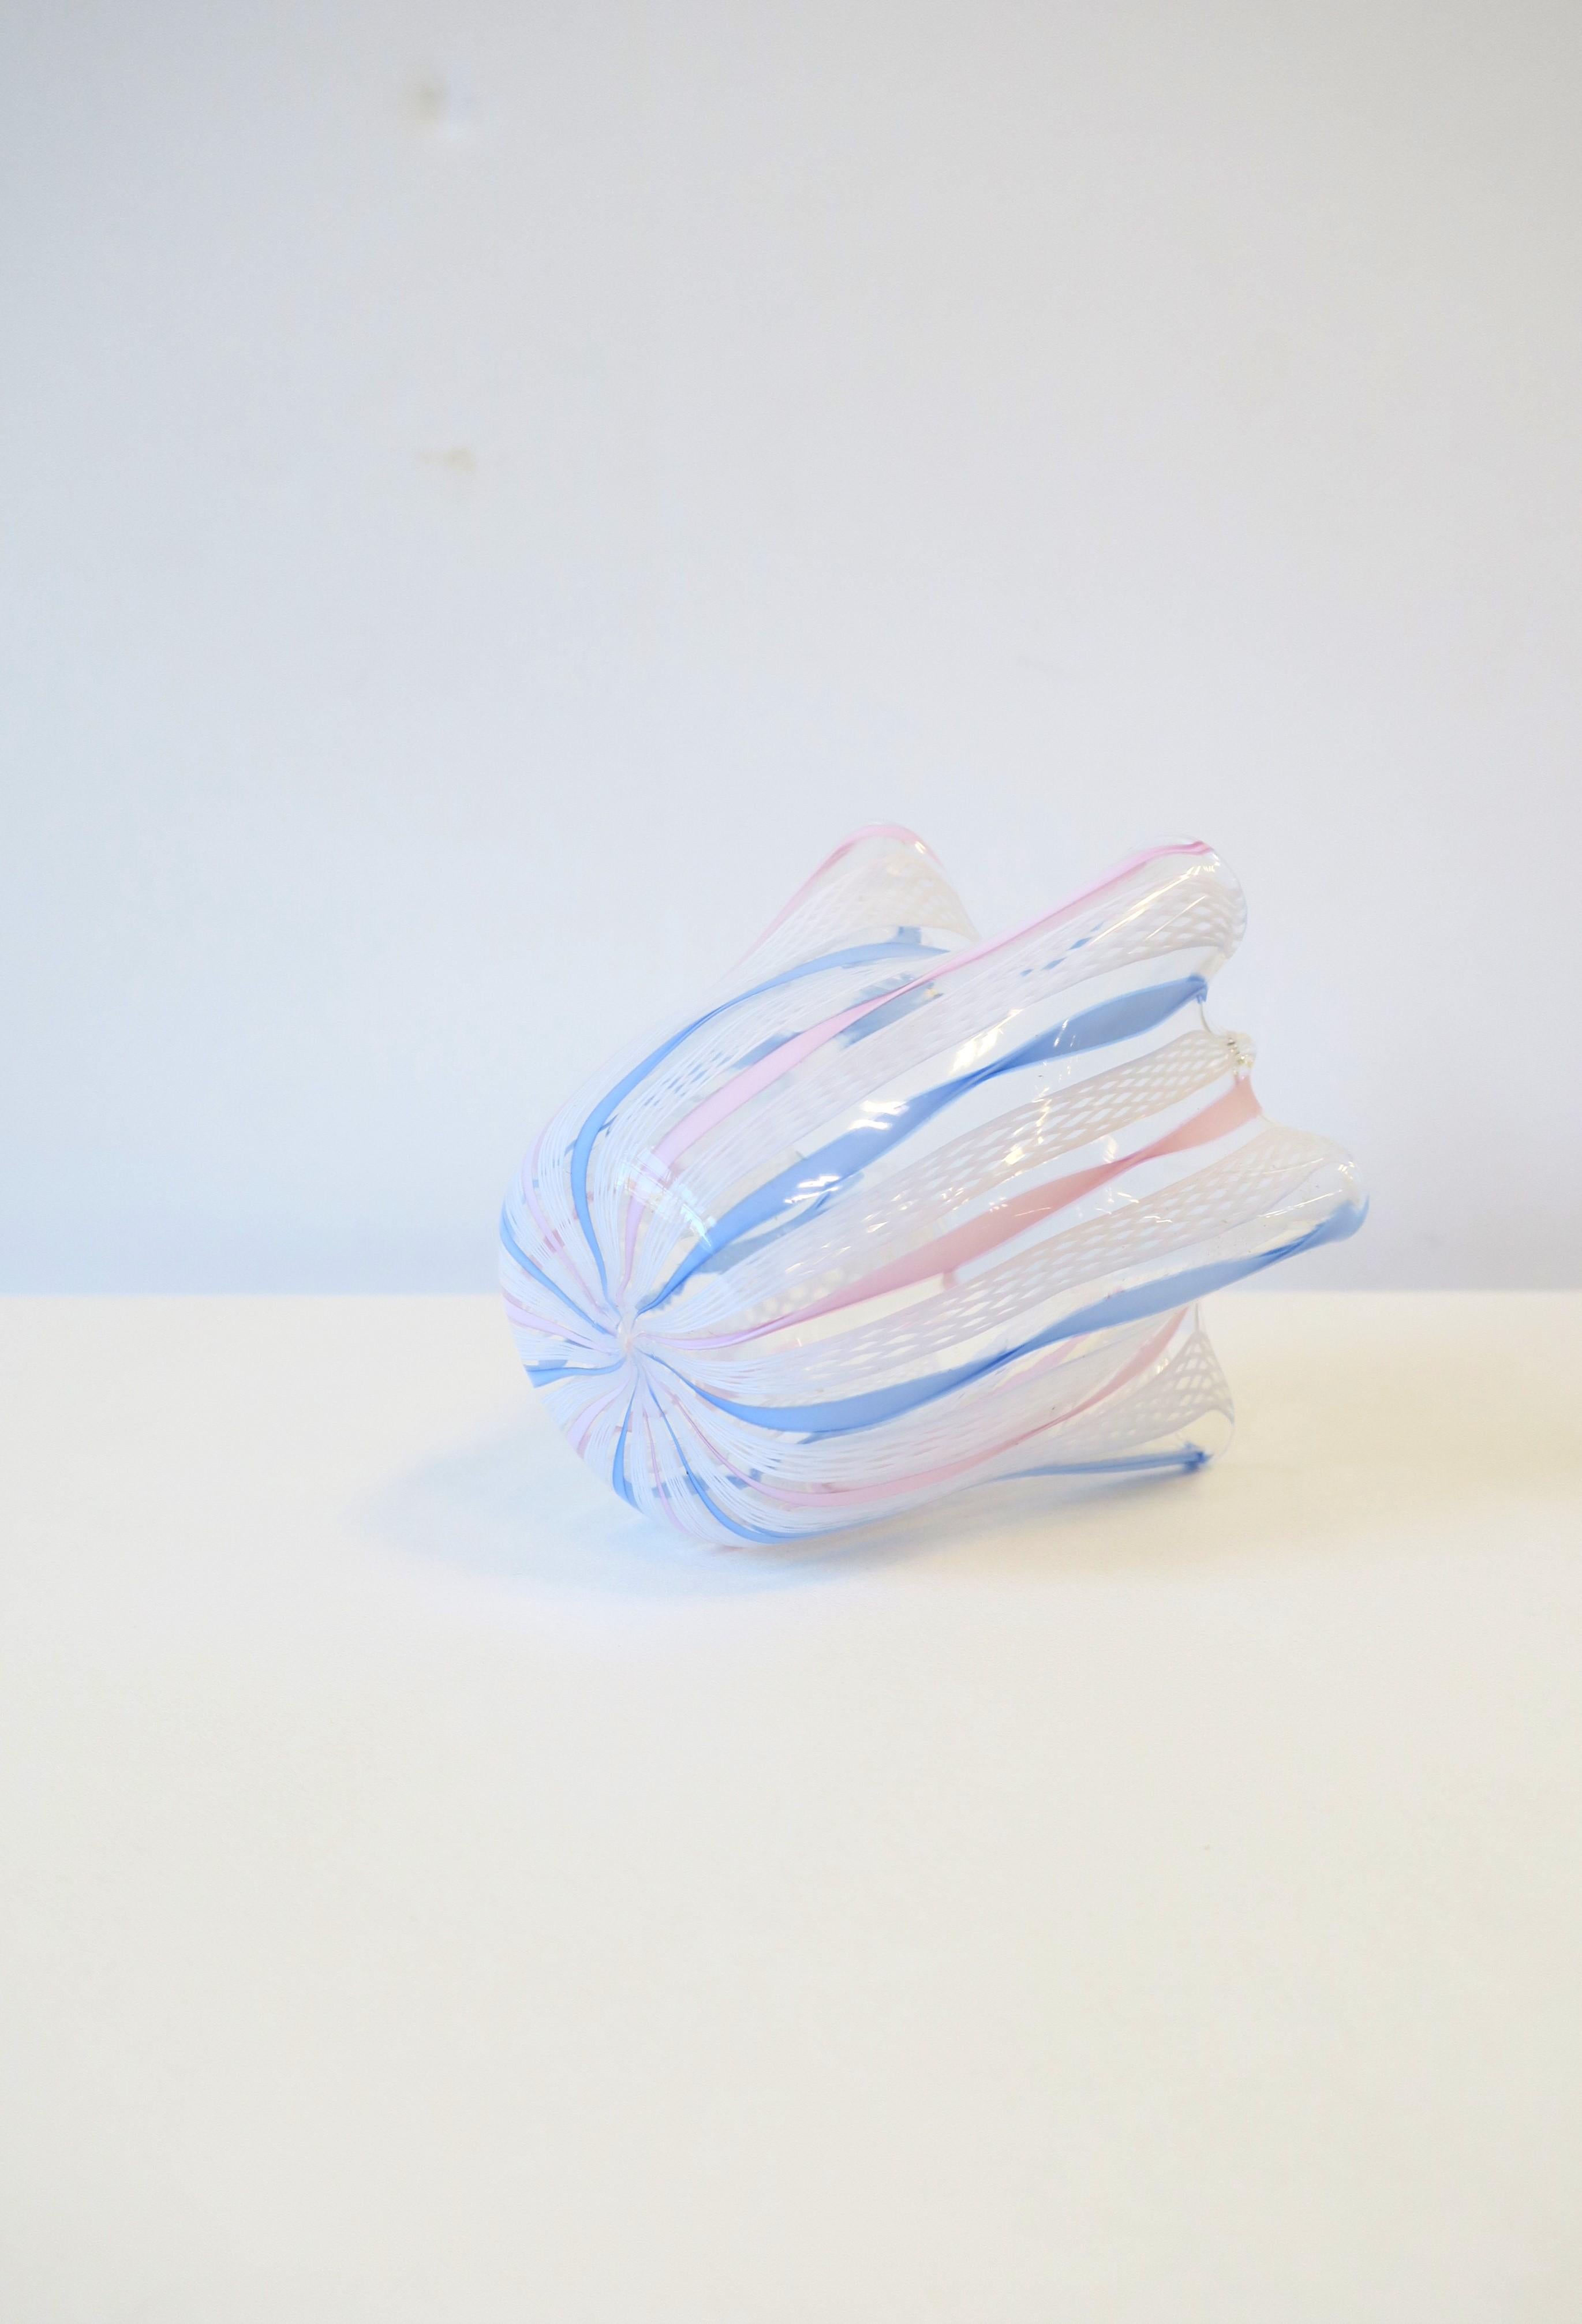 Venini Style Italian Art Glass Handkerchief Vase in White Pink & Blue In Good Condition For Sale In New York, NY